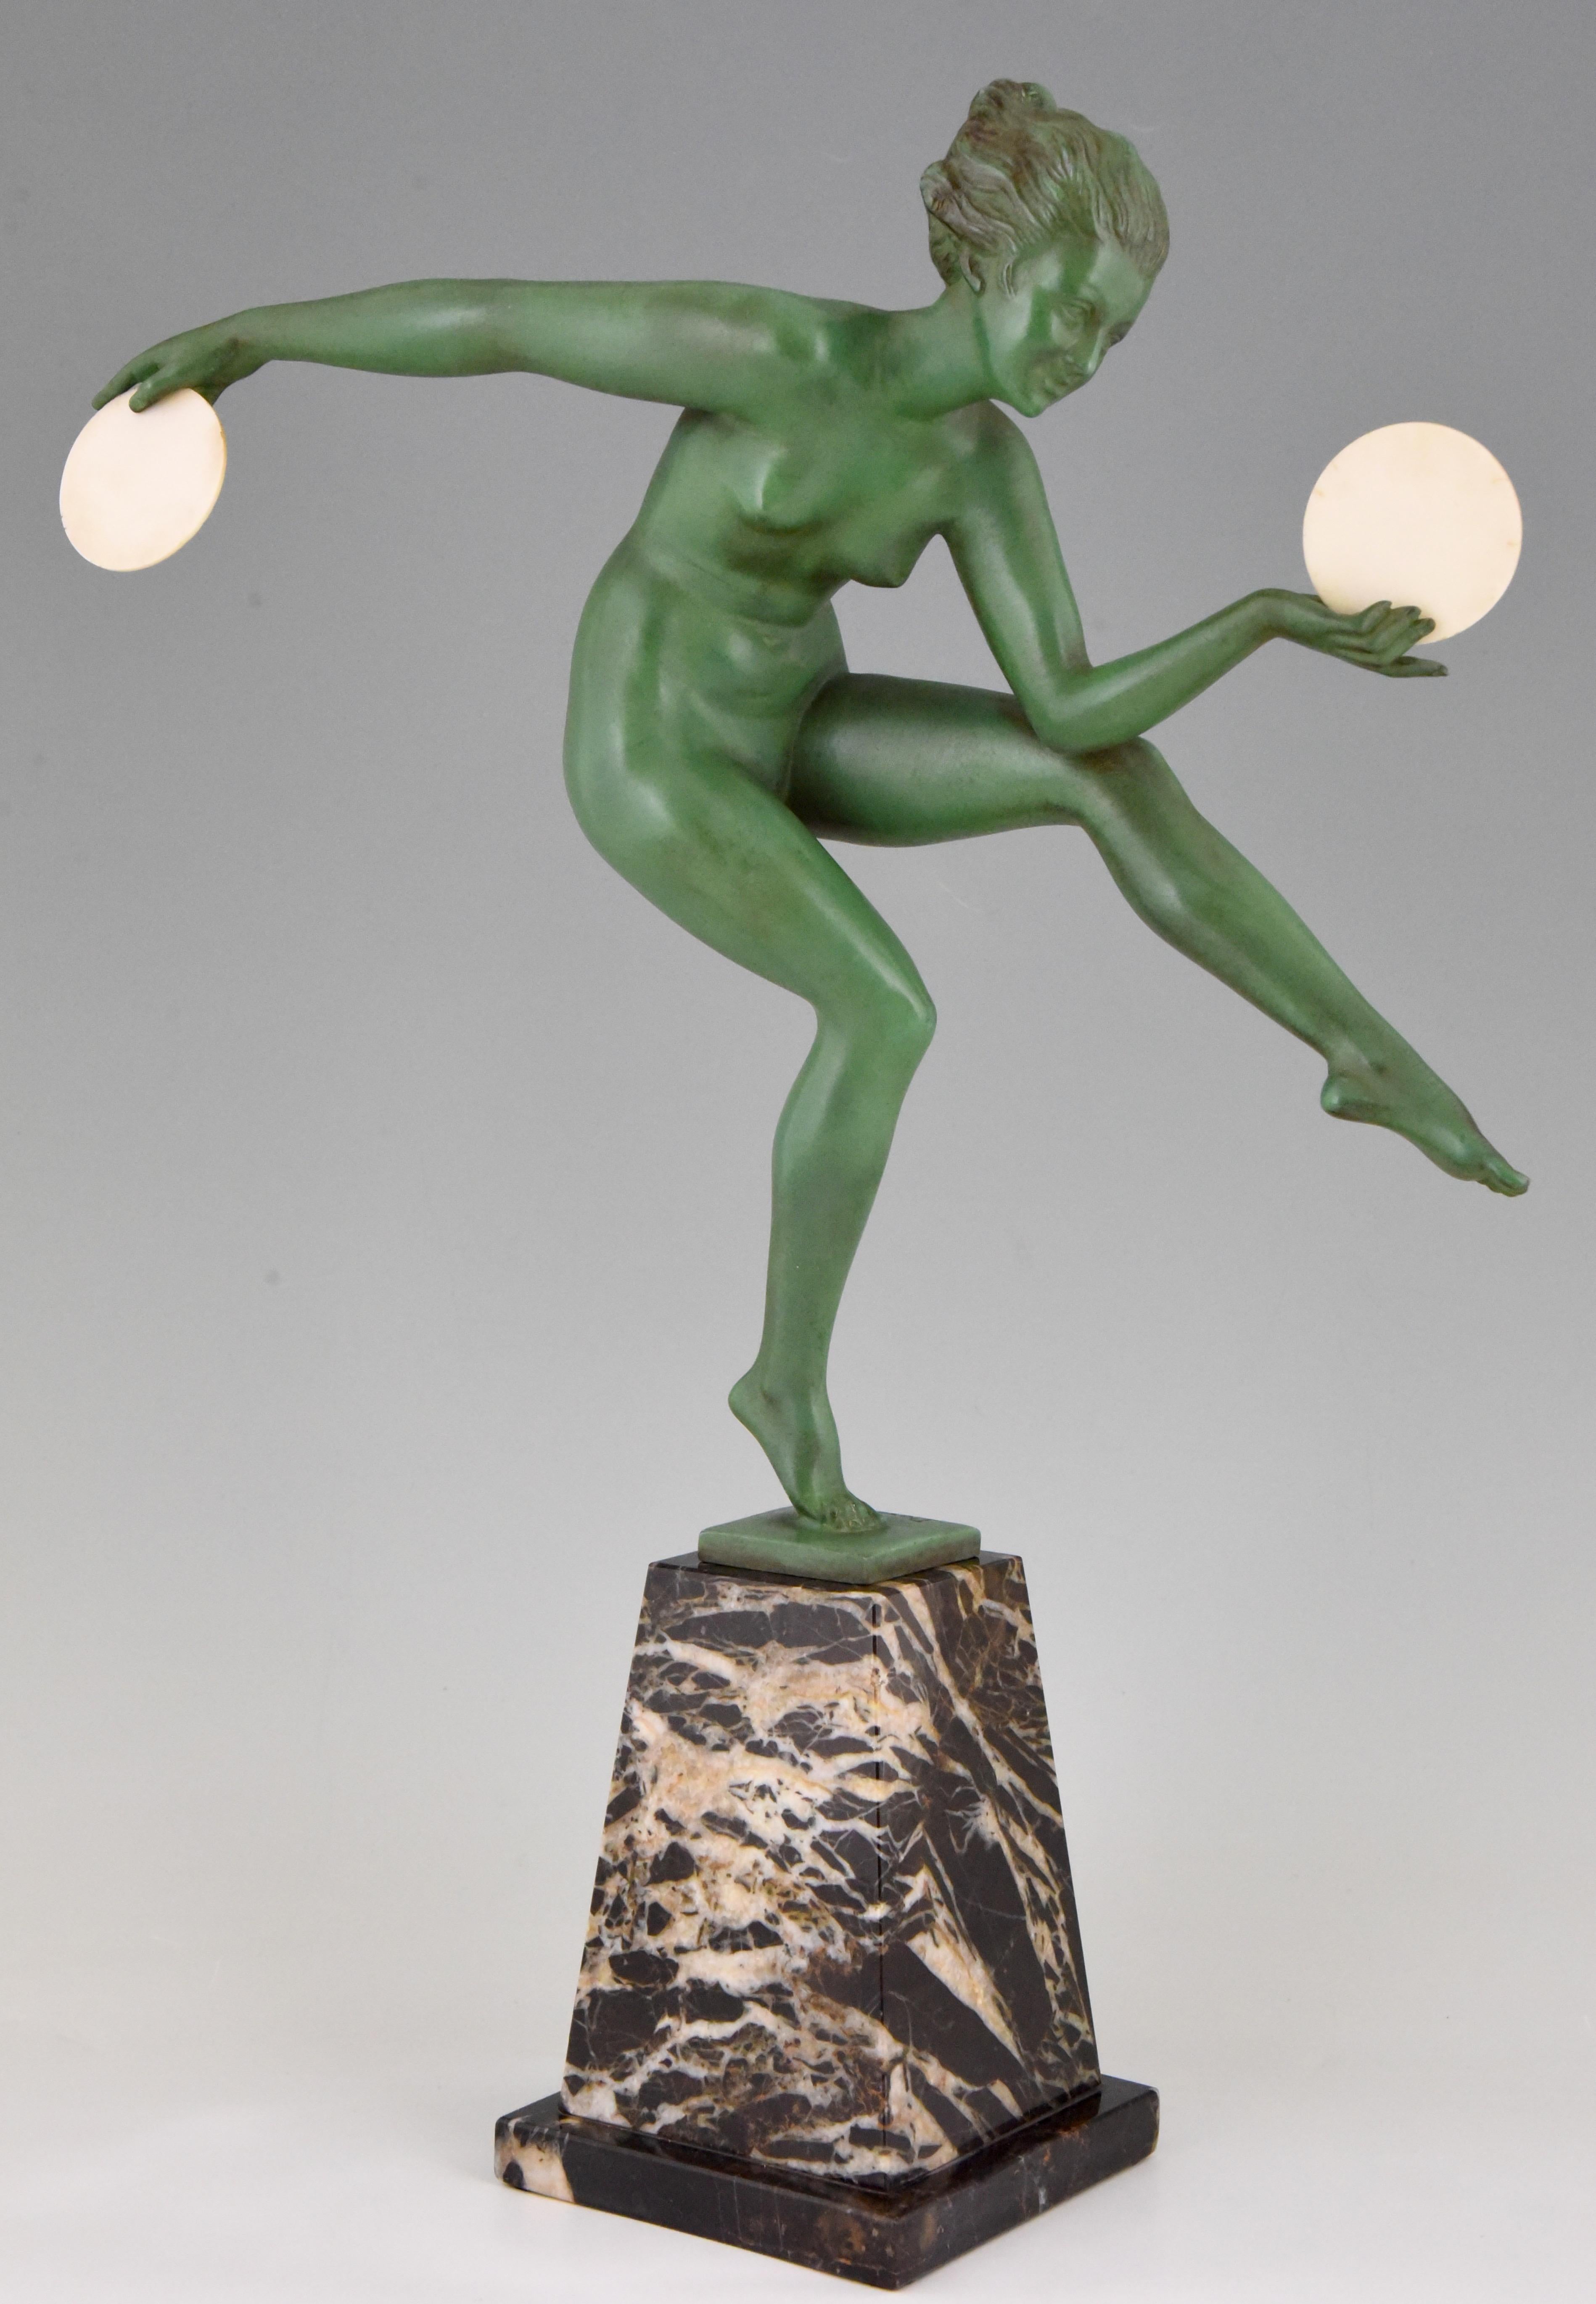 Impressive Art Deco sculpture of a nude dancer with discs.
19.7 inch tall. Signed Derenne. Pseudonym used by Marcel Bouraine for his art metal sculptures cast by the Max Le Verrier foundry.
France, 1930. 

Literature: 